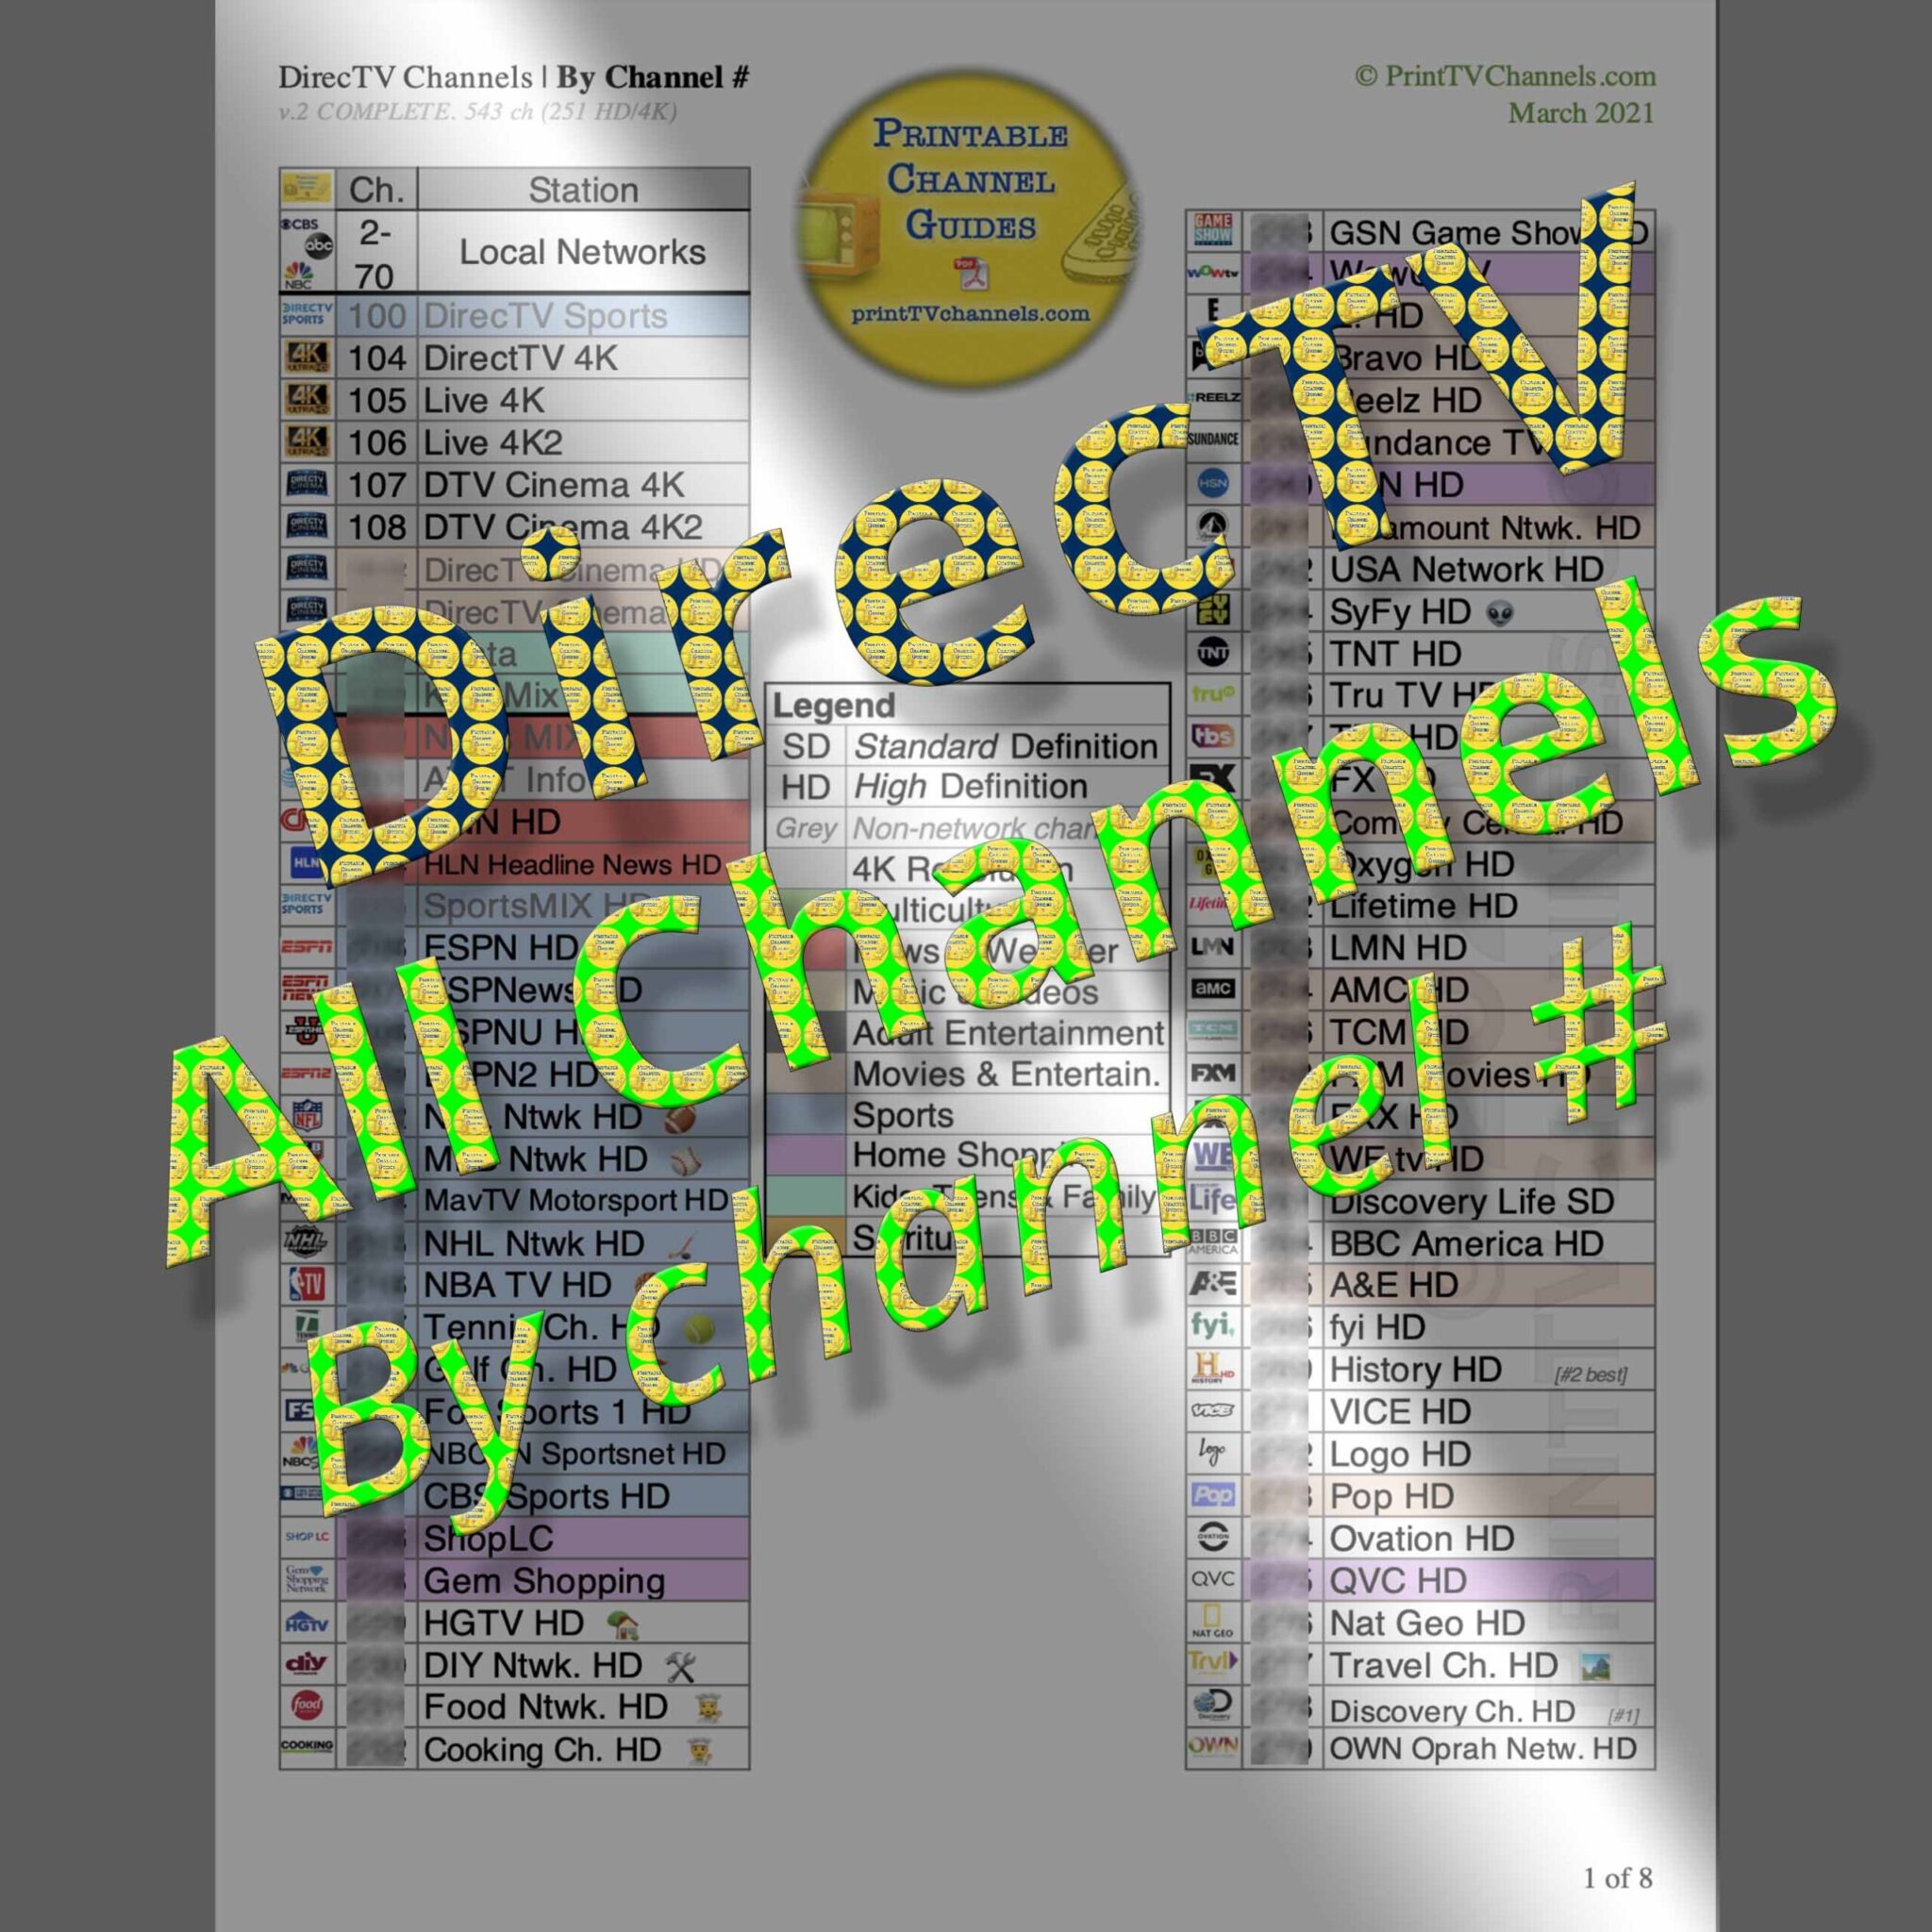 directv-channel-guide-by-channel-number-complete-version